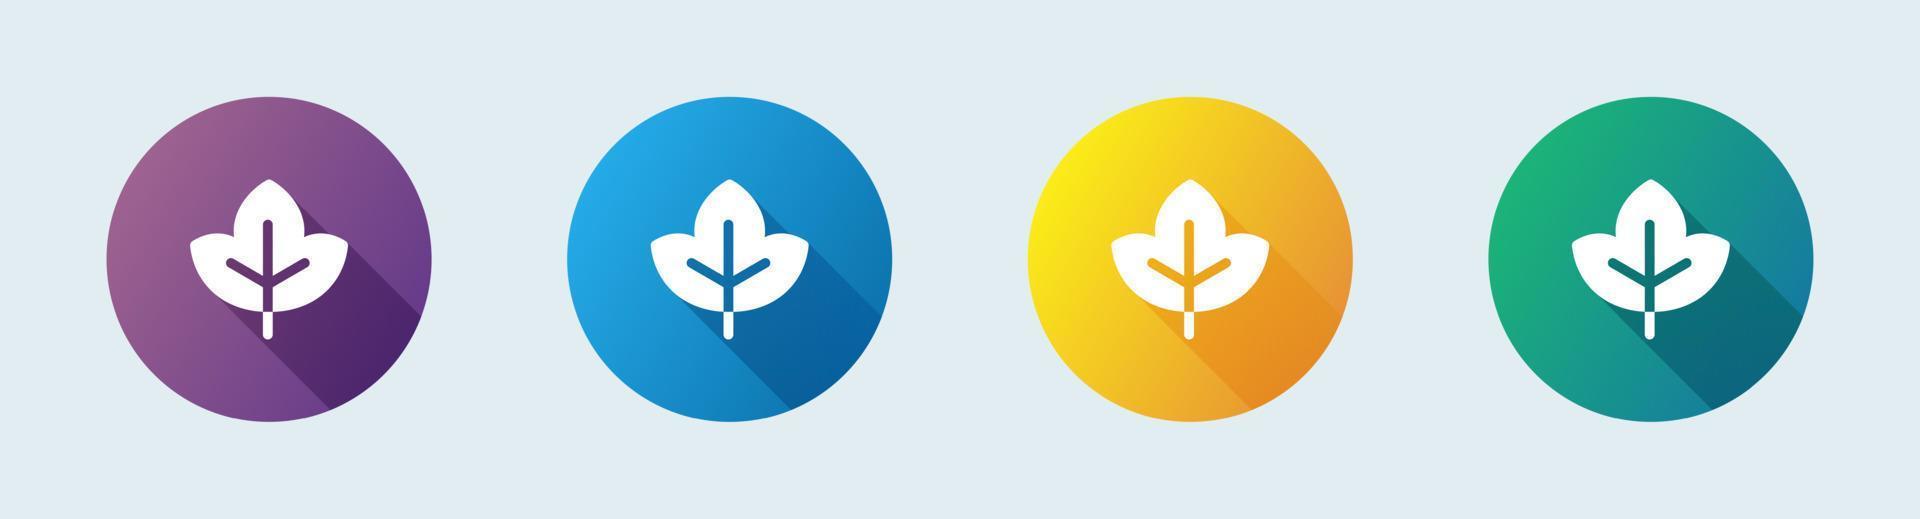 Maple solid icon in flat design style. Leaf signs vector illustration.